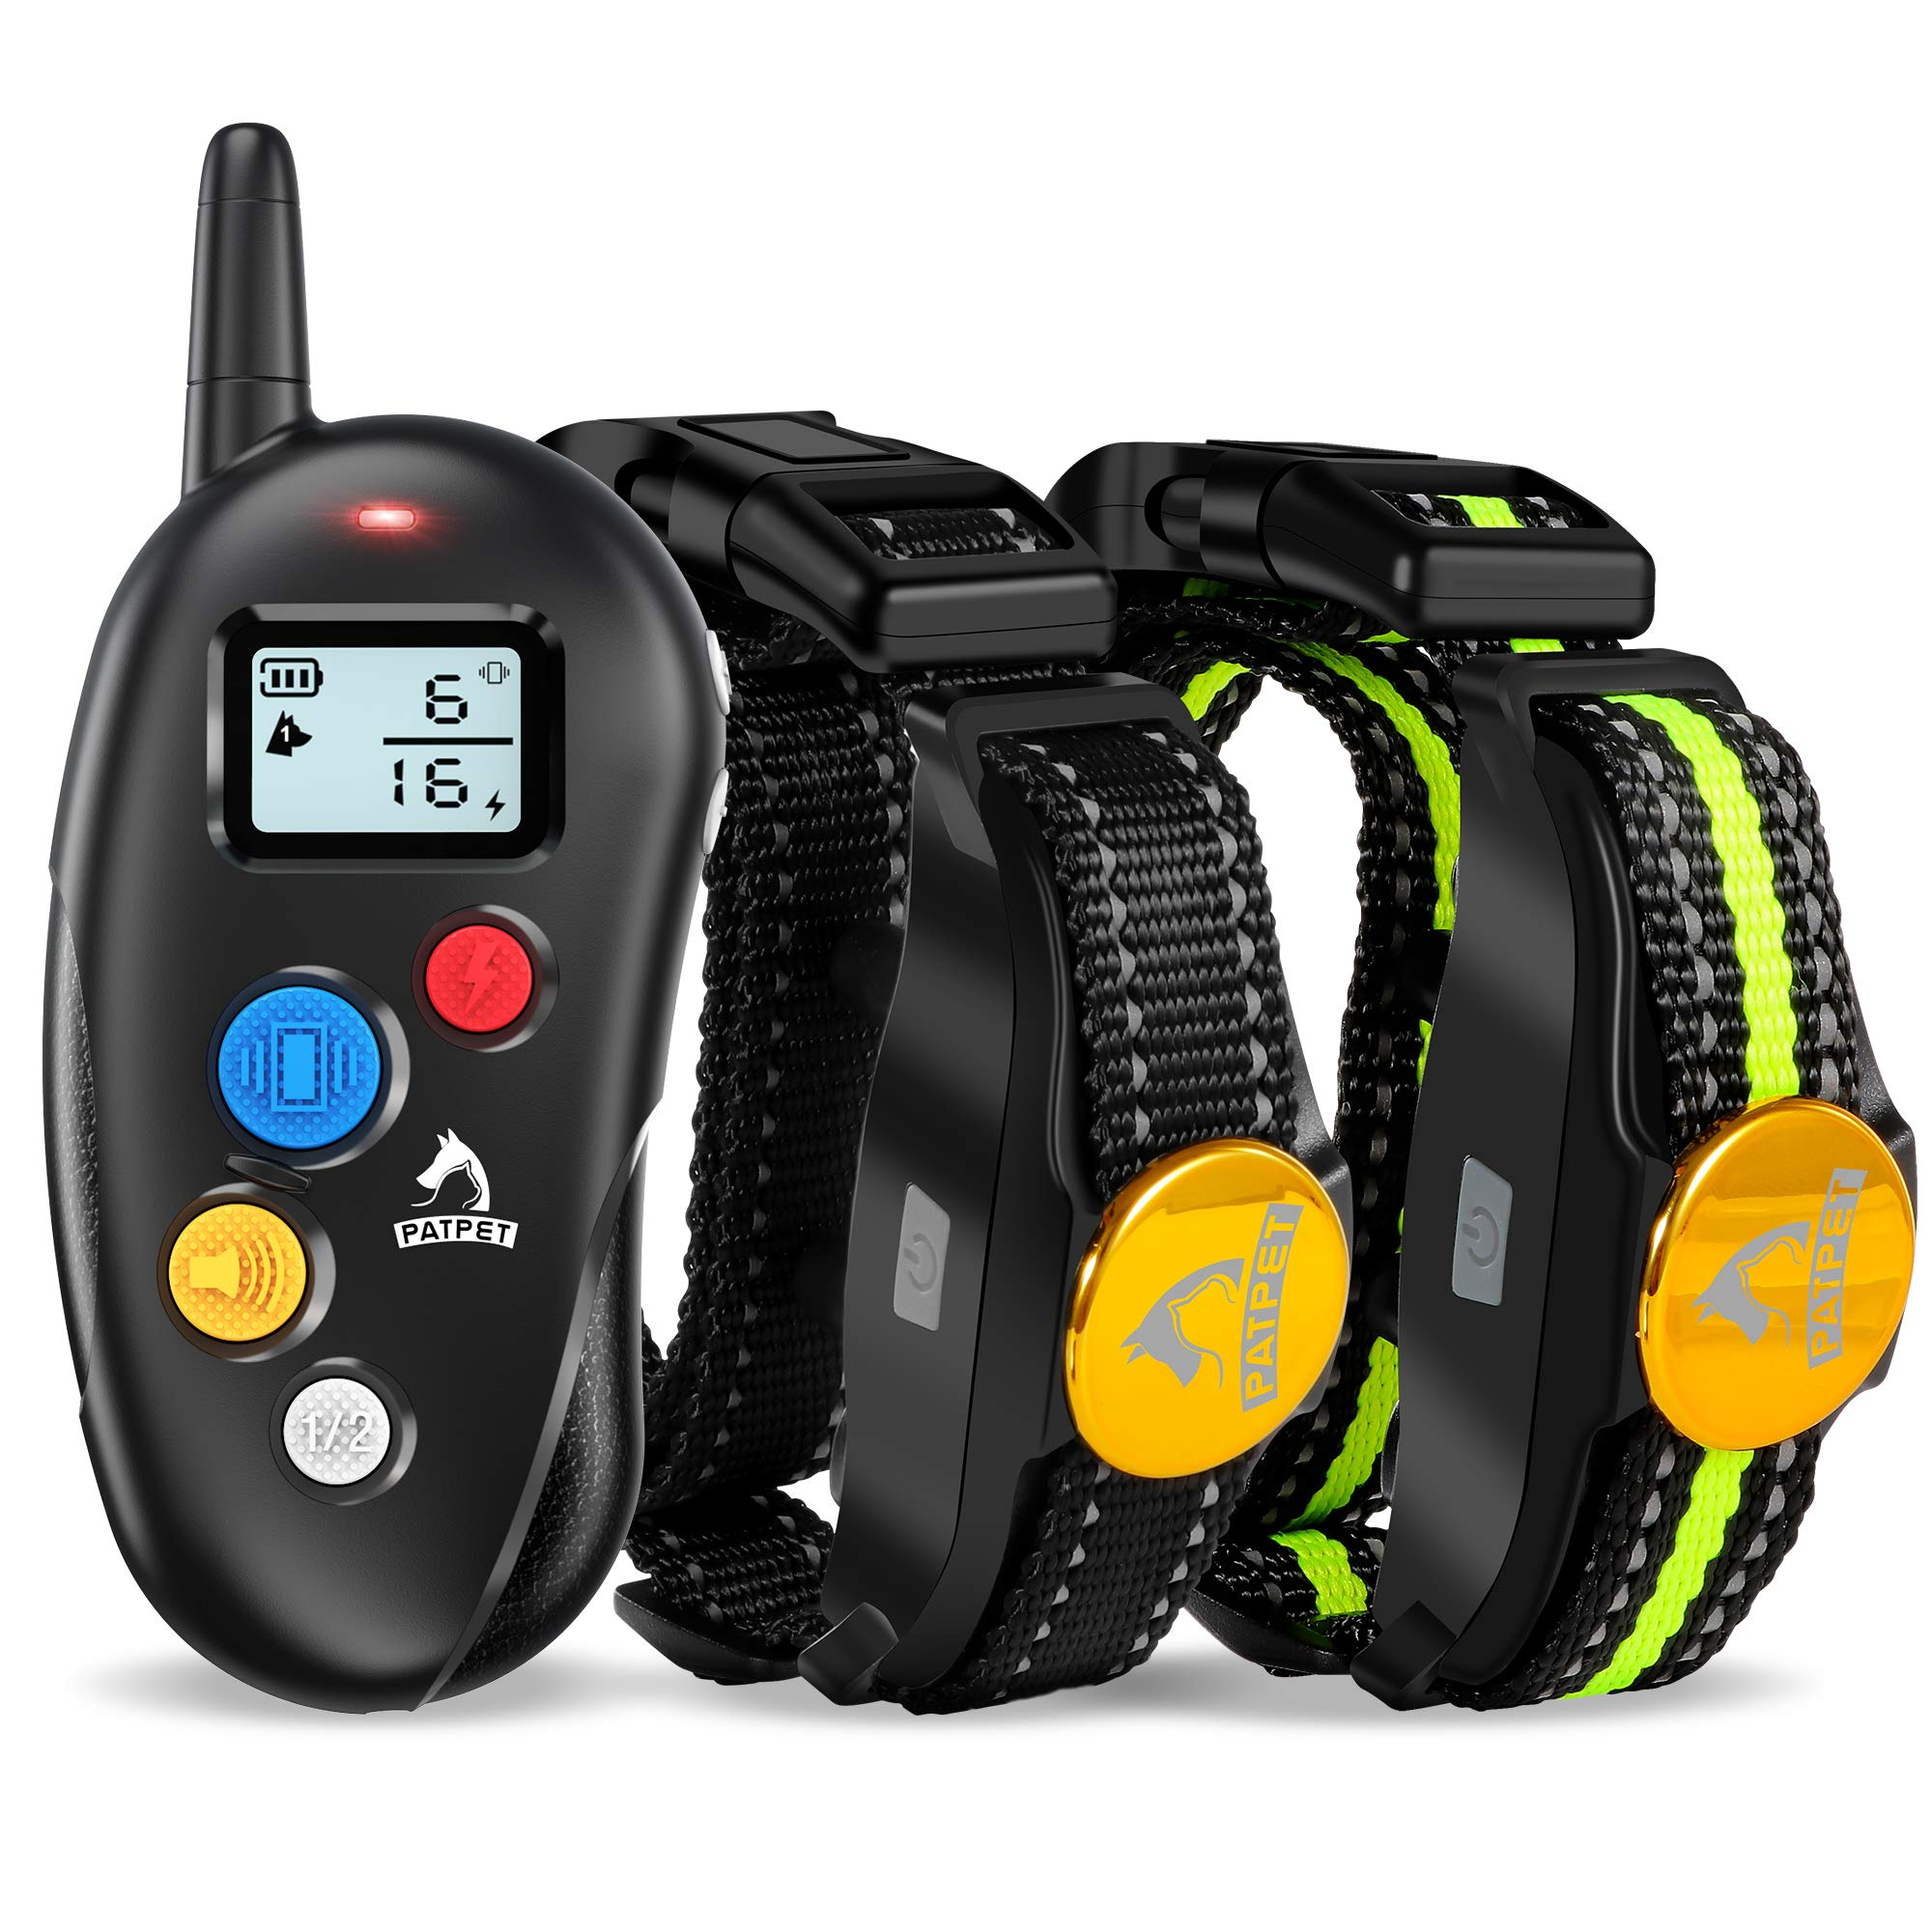 PATPET Dog Training Collar - 2 Receiver Rechargeable IPX7 Waterproof Shock Collar with Remote - 3 Training Modes, Beep, Vibration and Shock Perfect for Small Medium Large Dogs